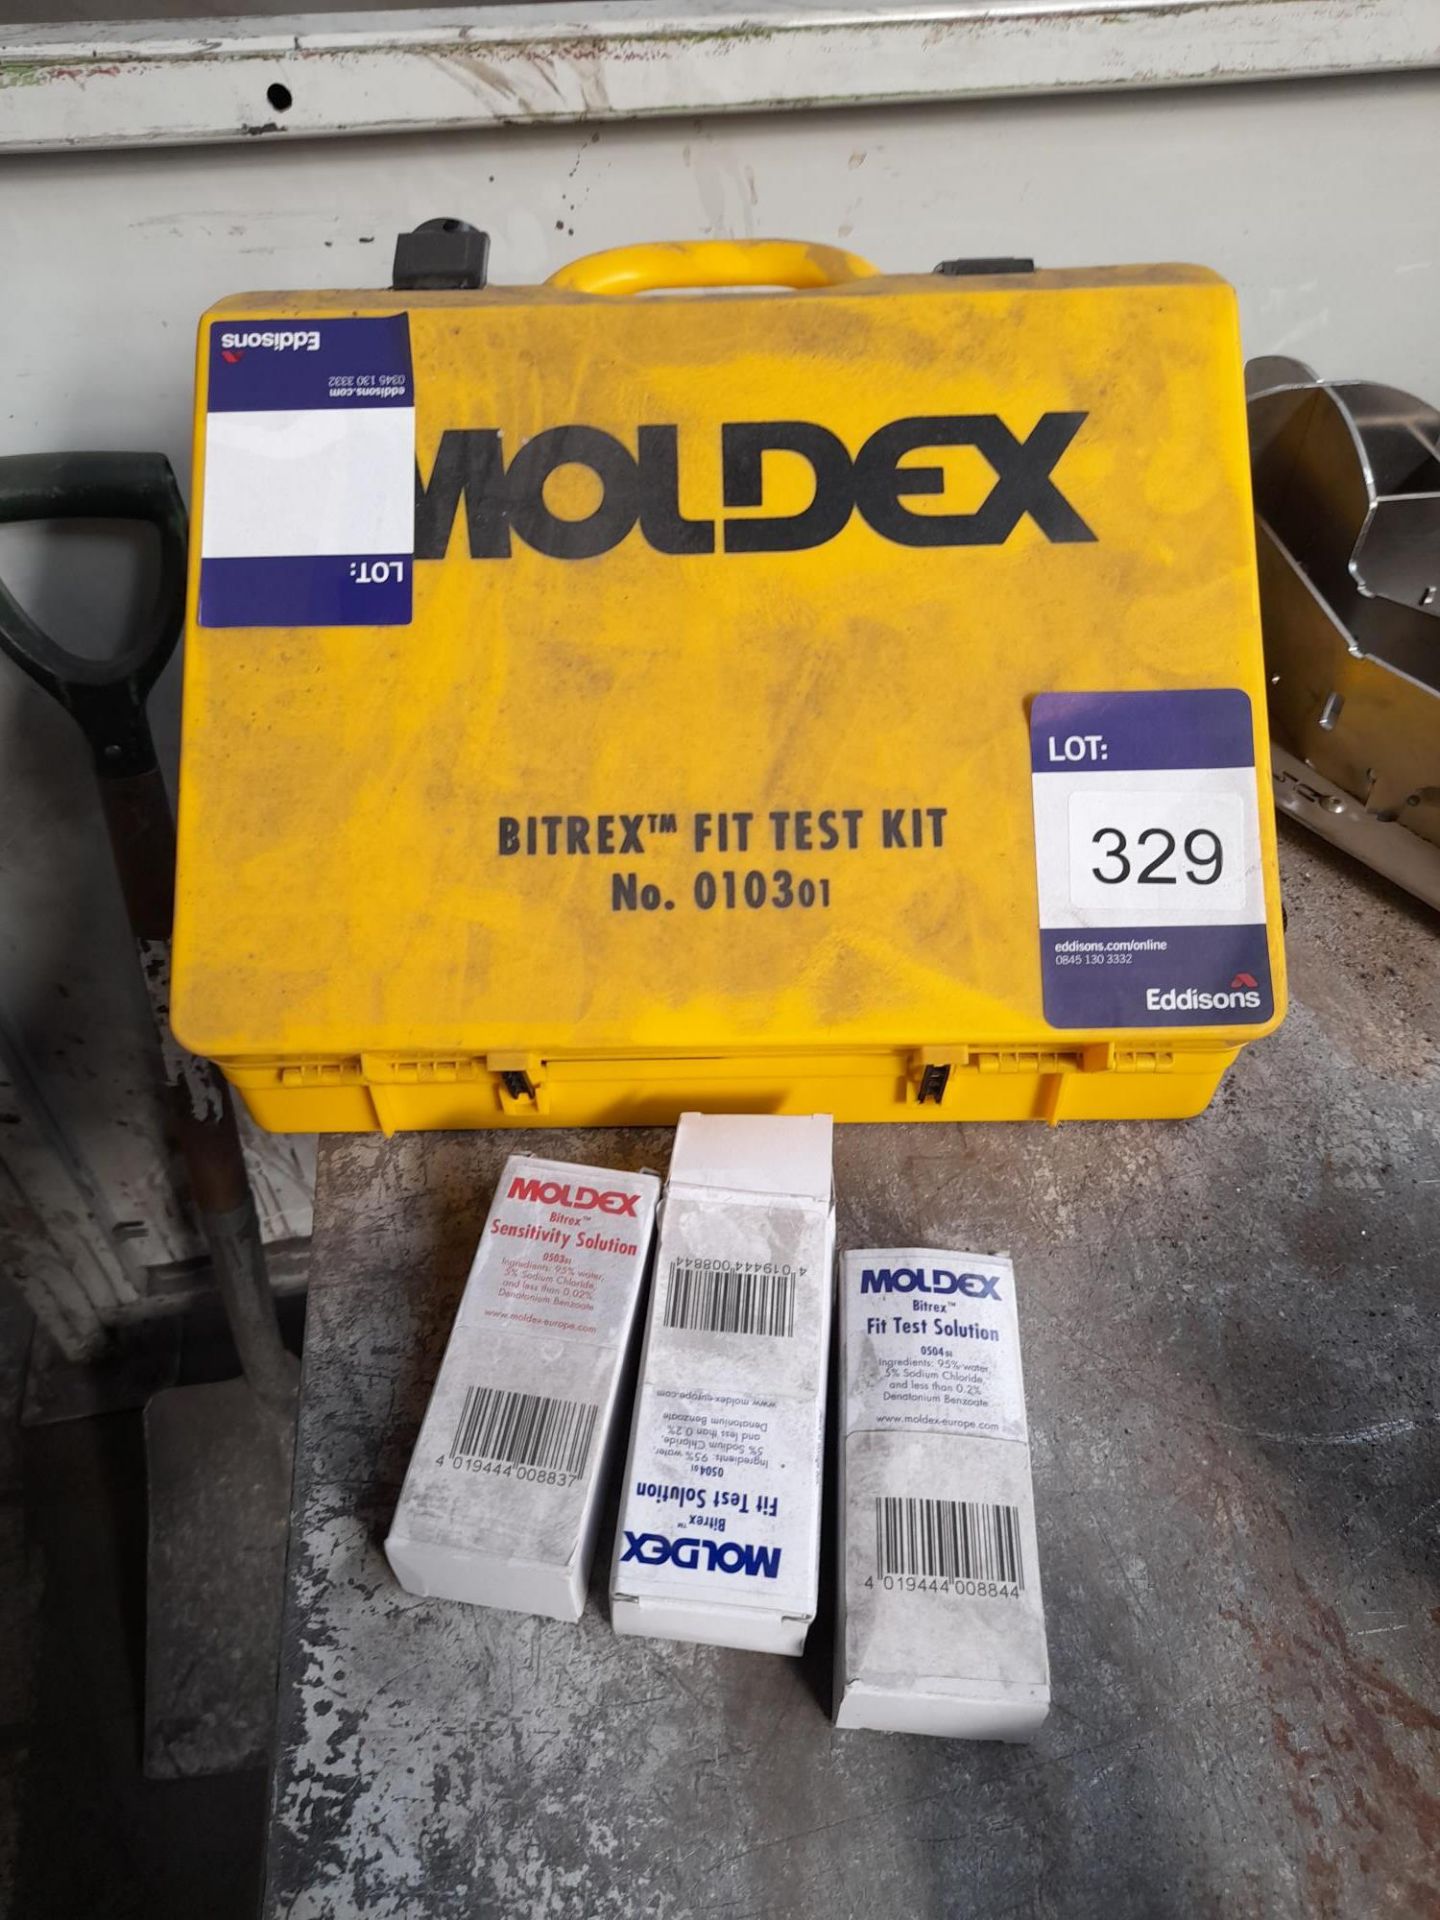 Moldex Bitrex Fit Test Kit with Solutions - Image 2 of 3